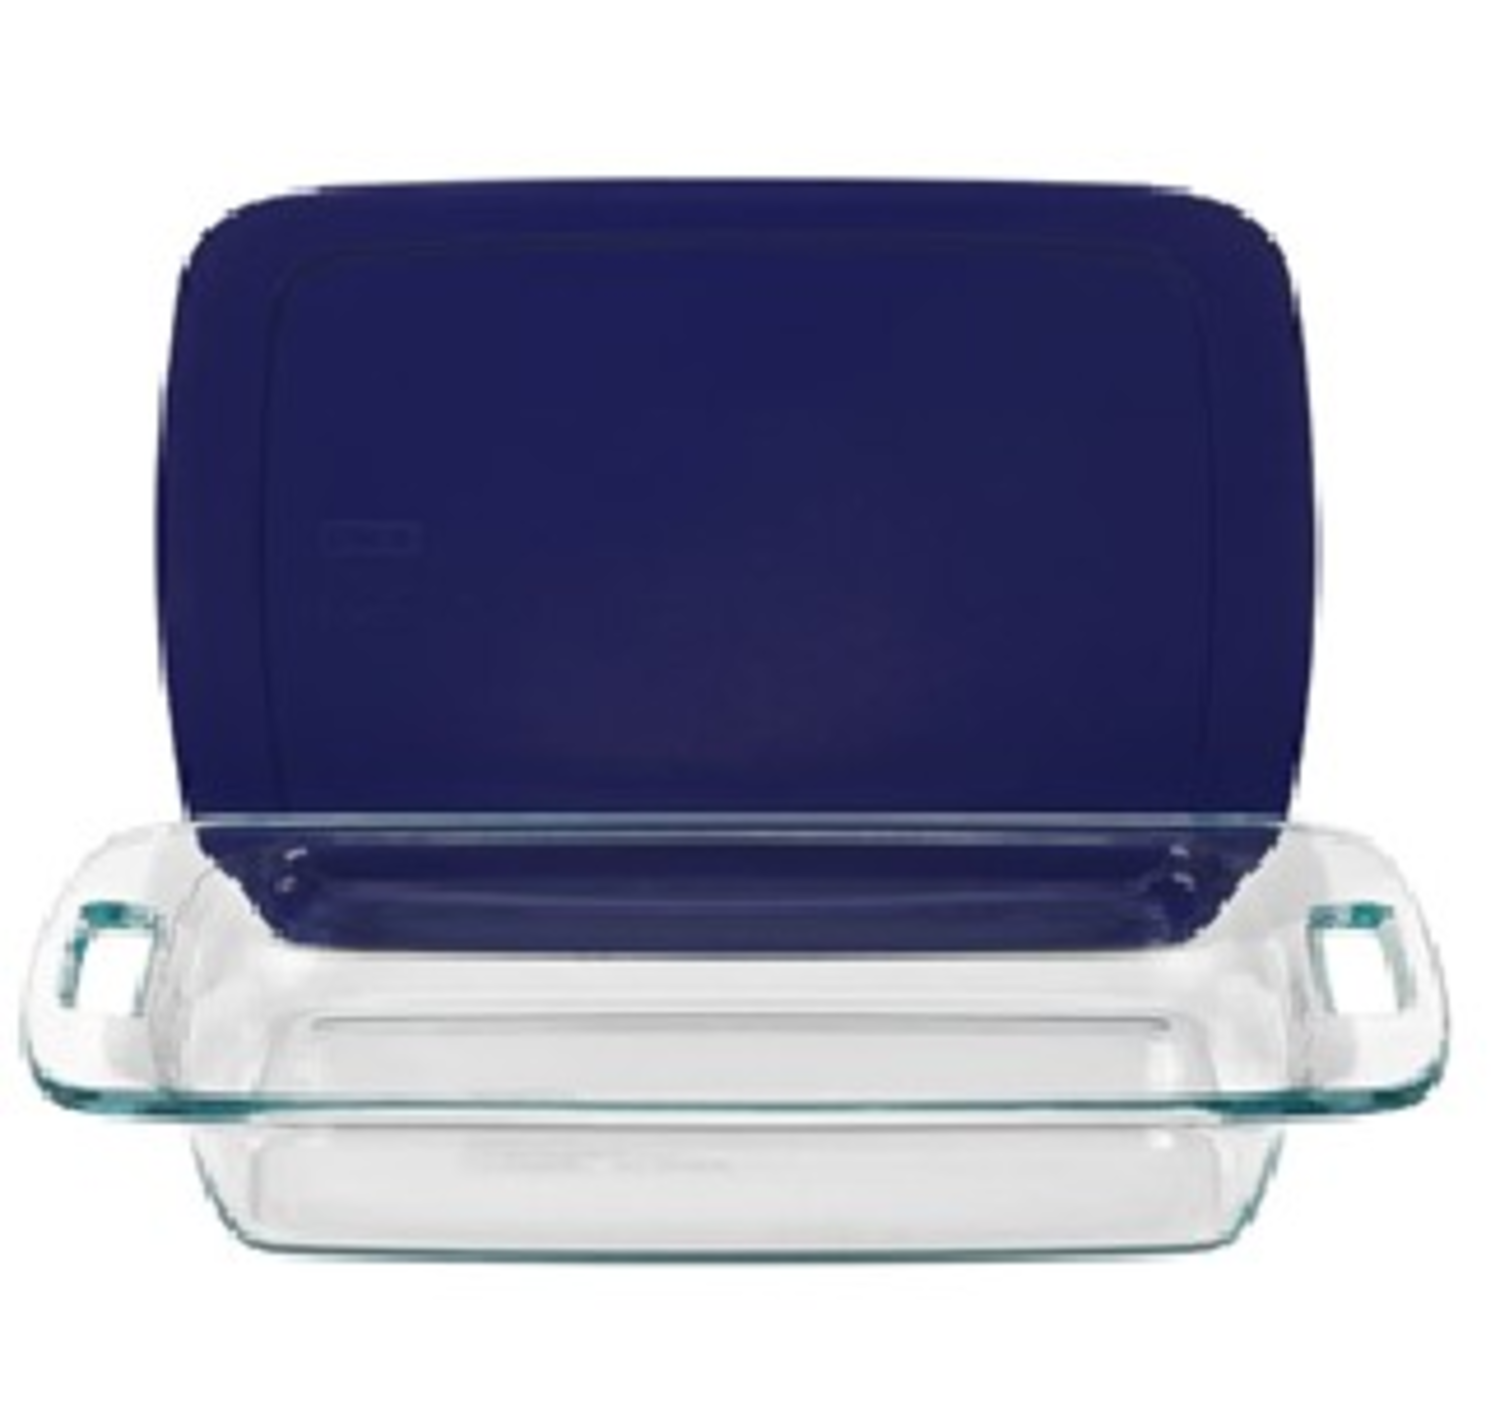 Pyrex Easy-Grab 8x8-inch baking dish with lid